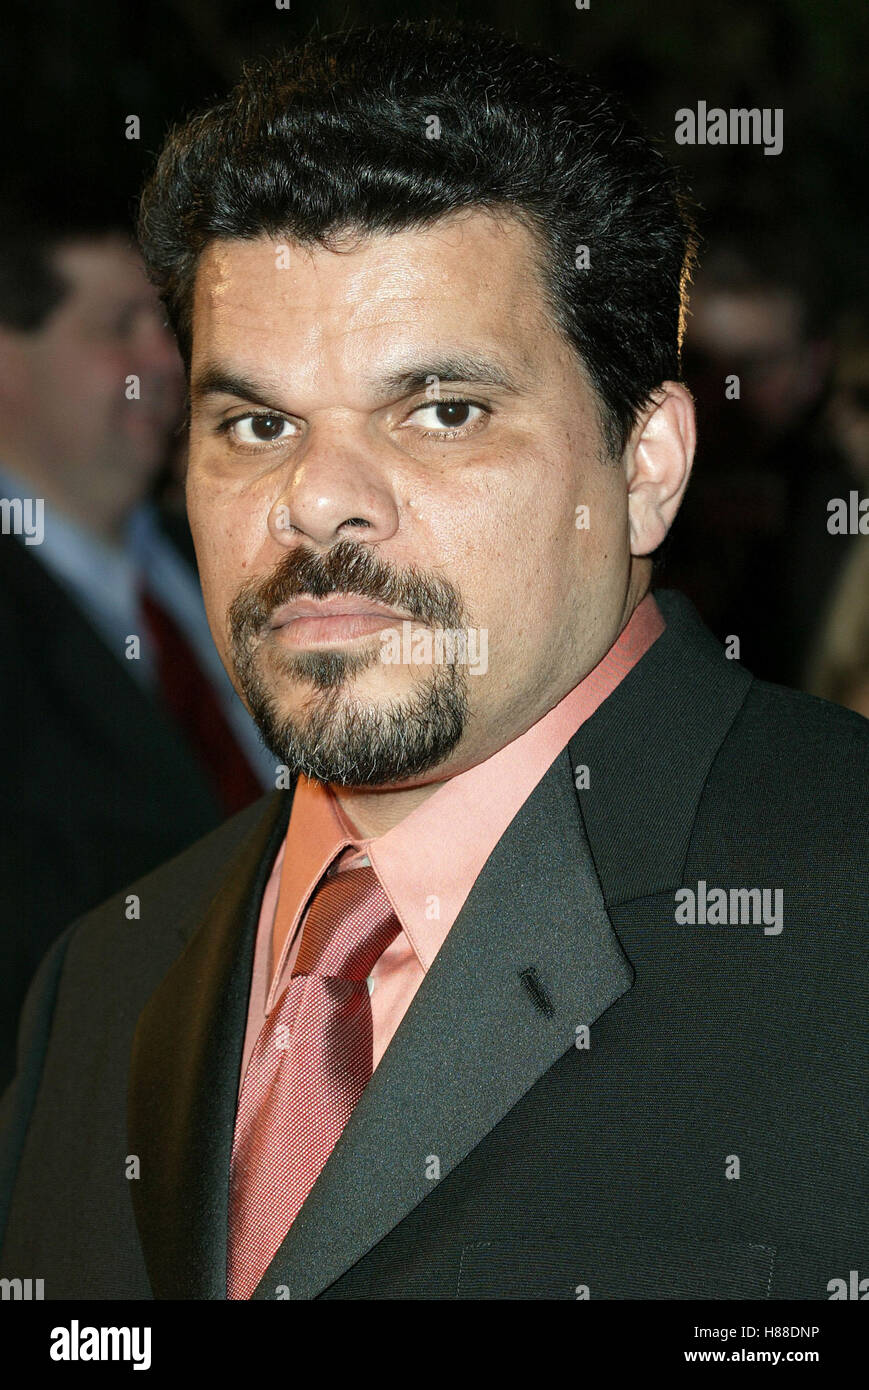 Luis guzman actor hi-res stock photography and images - Alamy